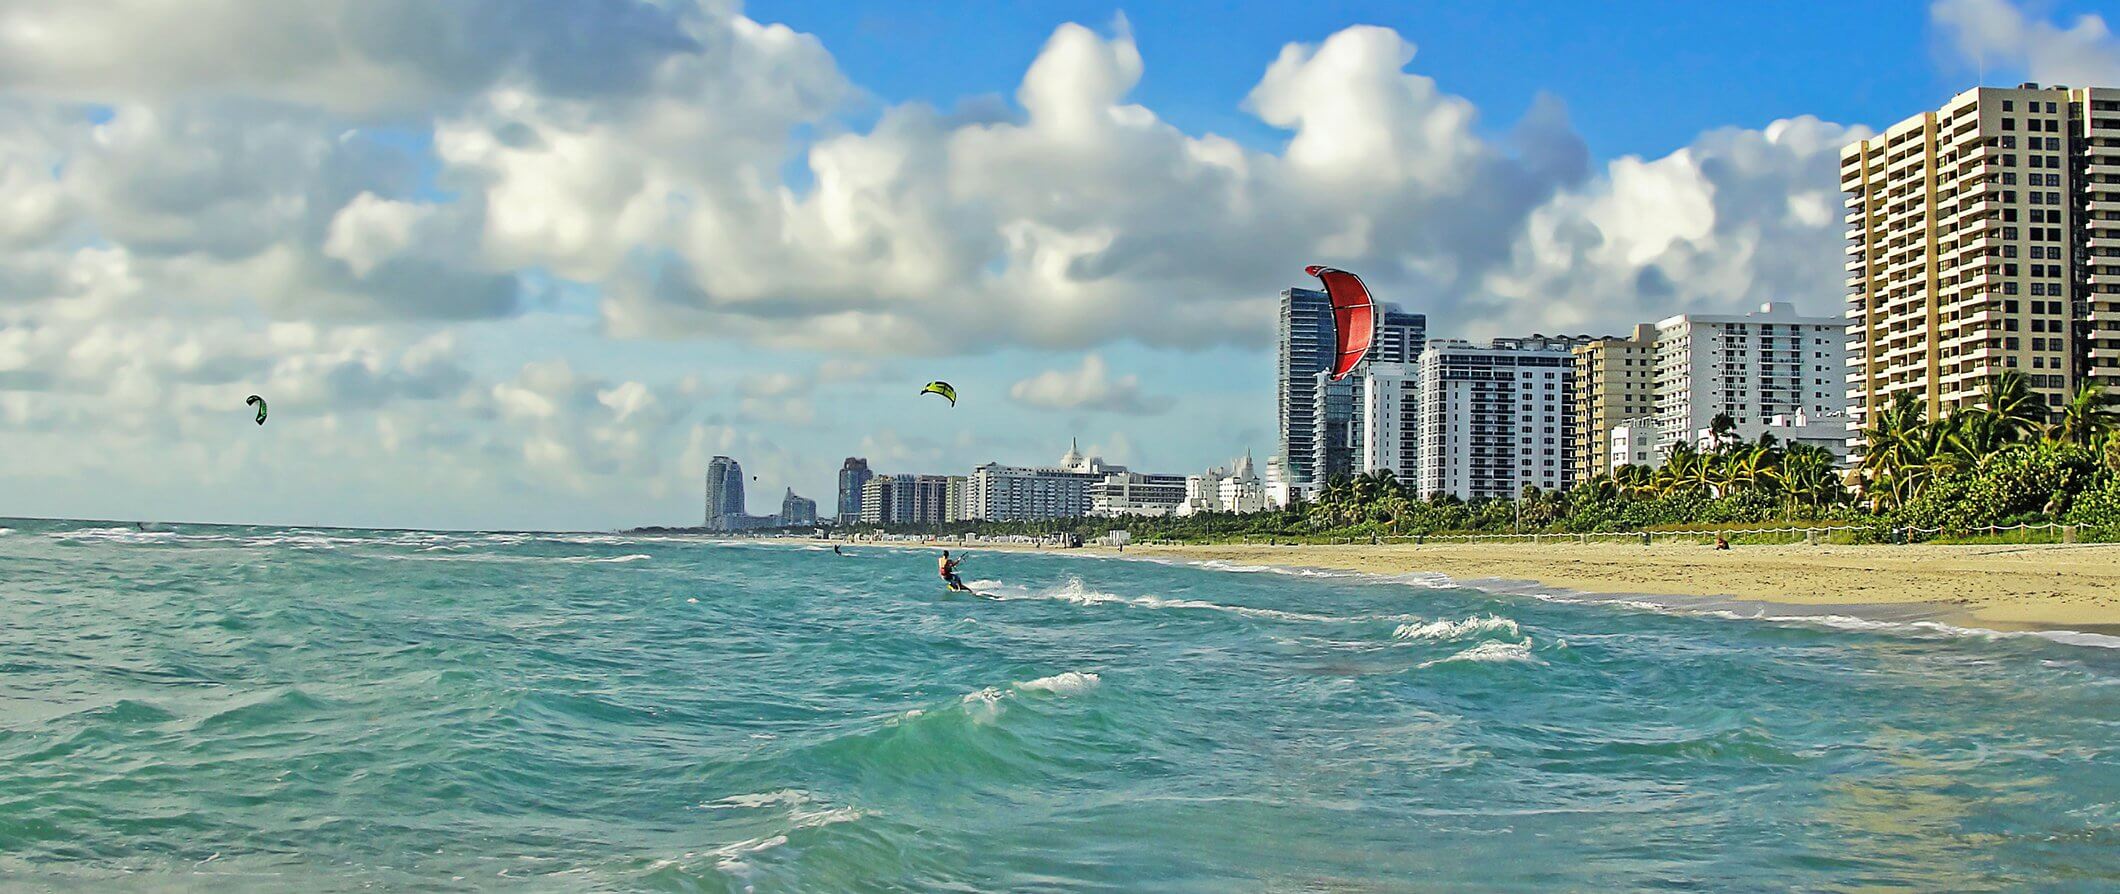 Miami beach with tower blocks to the right. Kite surfers in the sea.